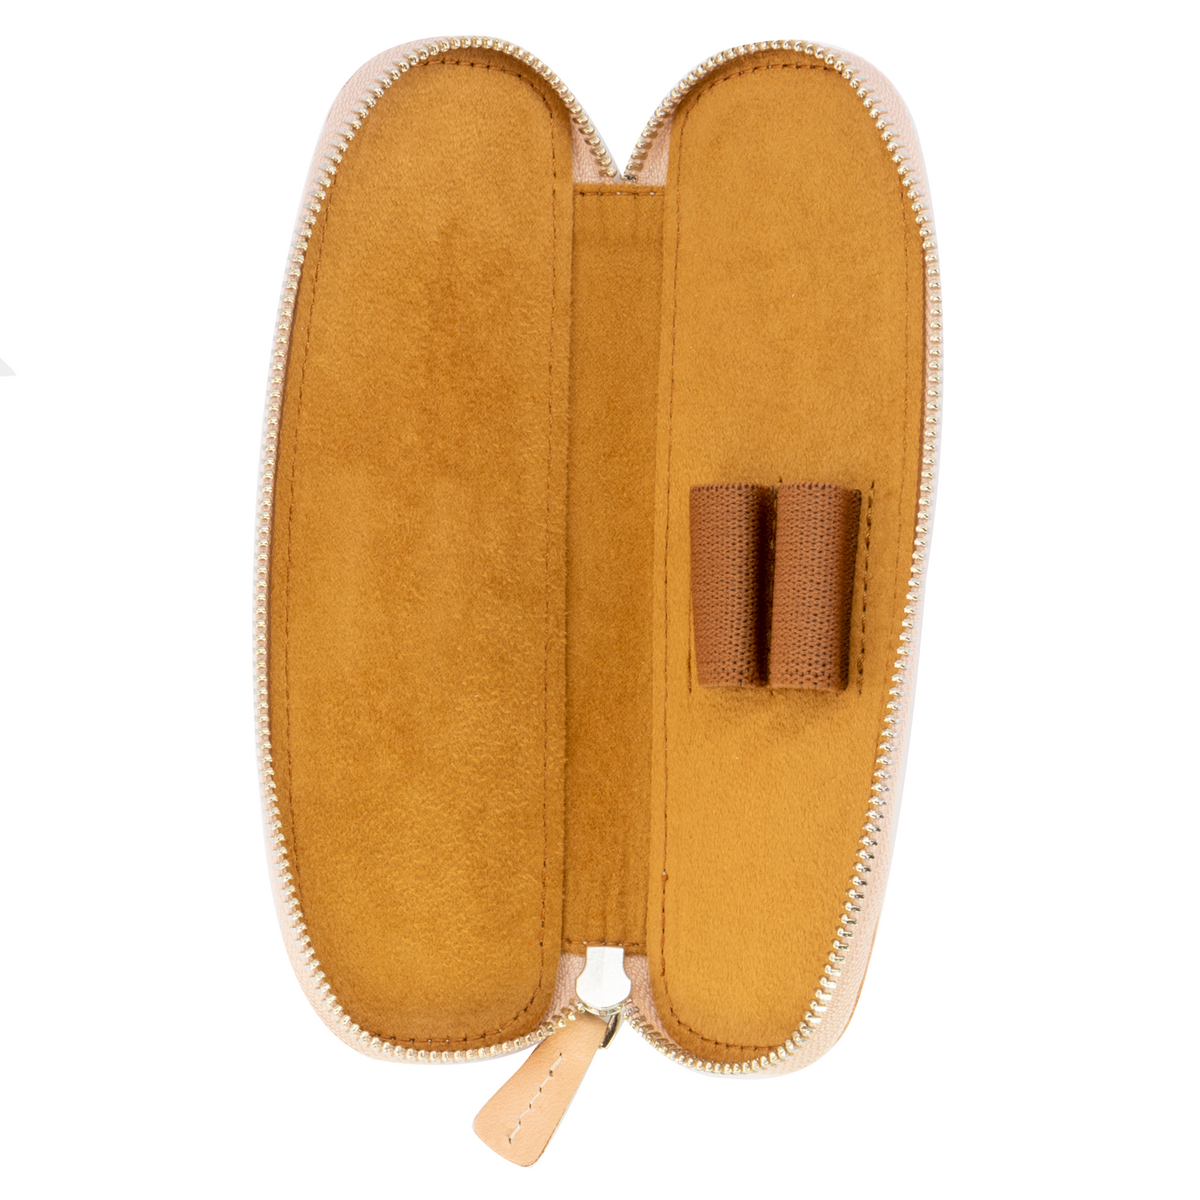 Galen Leather Co. Zippered Duo Slim Pen Case for 2 Pens- Undyed Leather